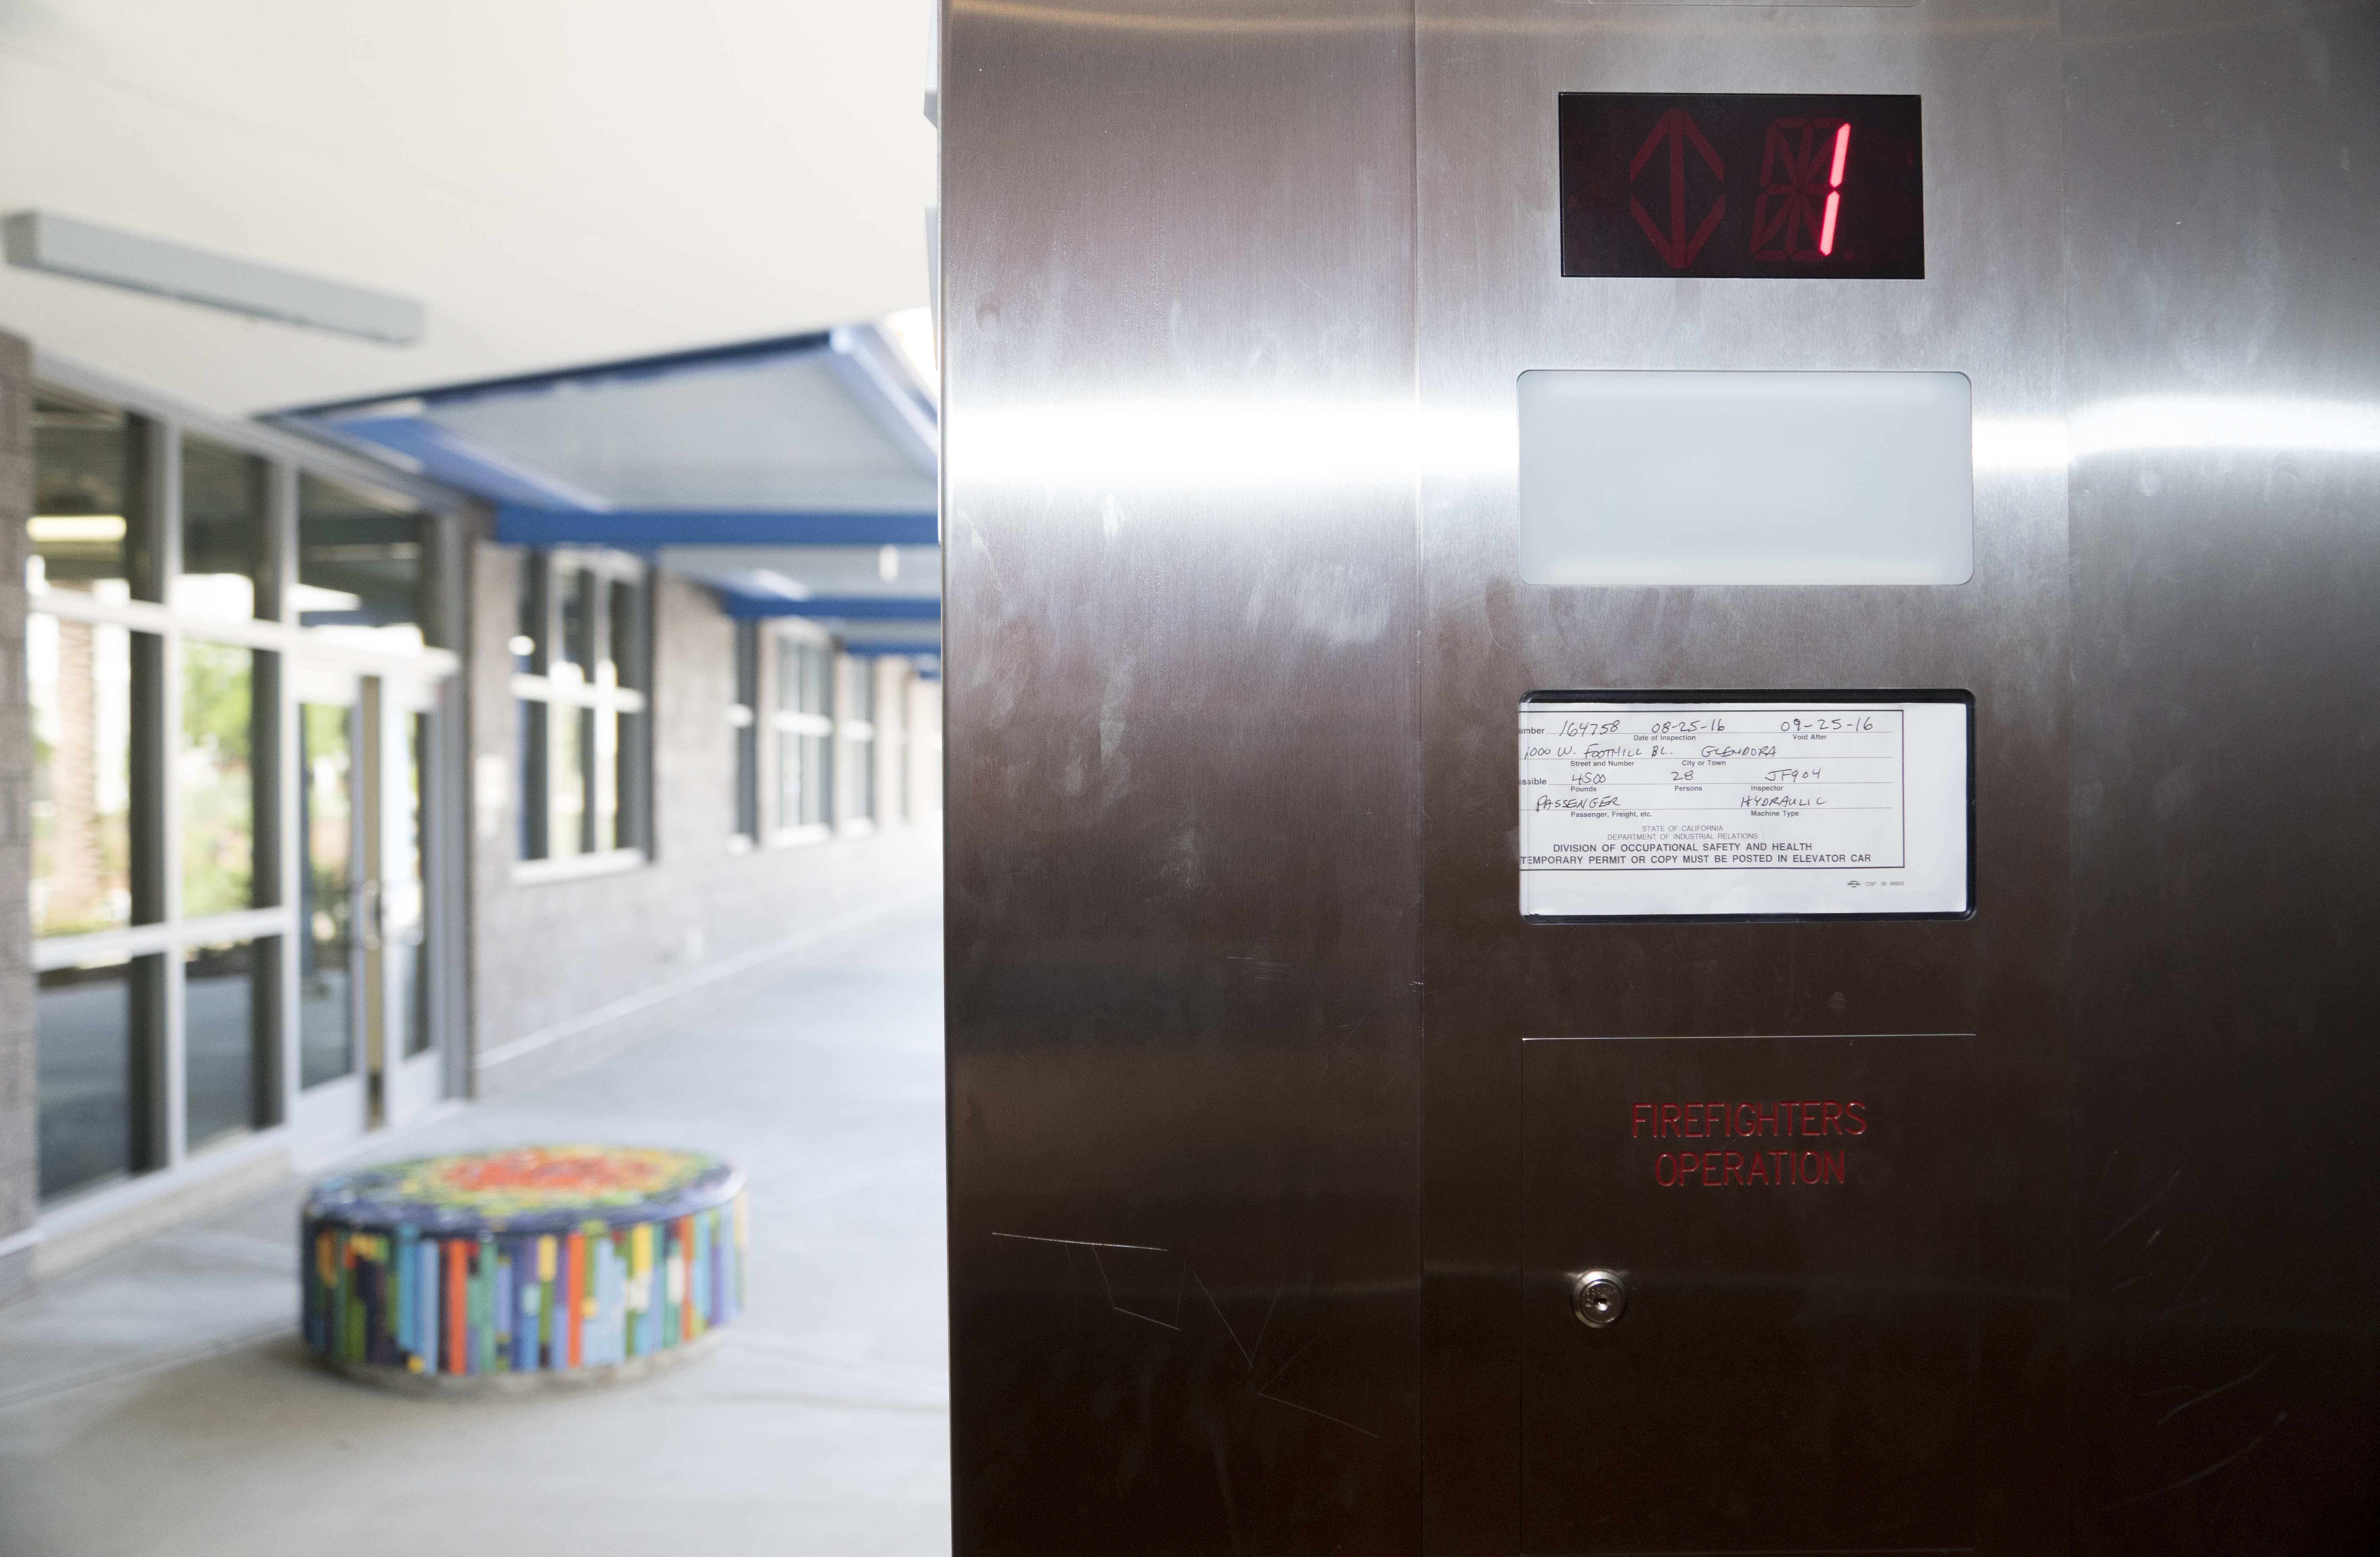 Going Up? Take the stairs: Expired elevator permits